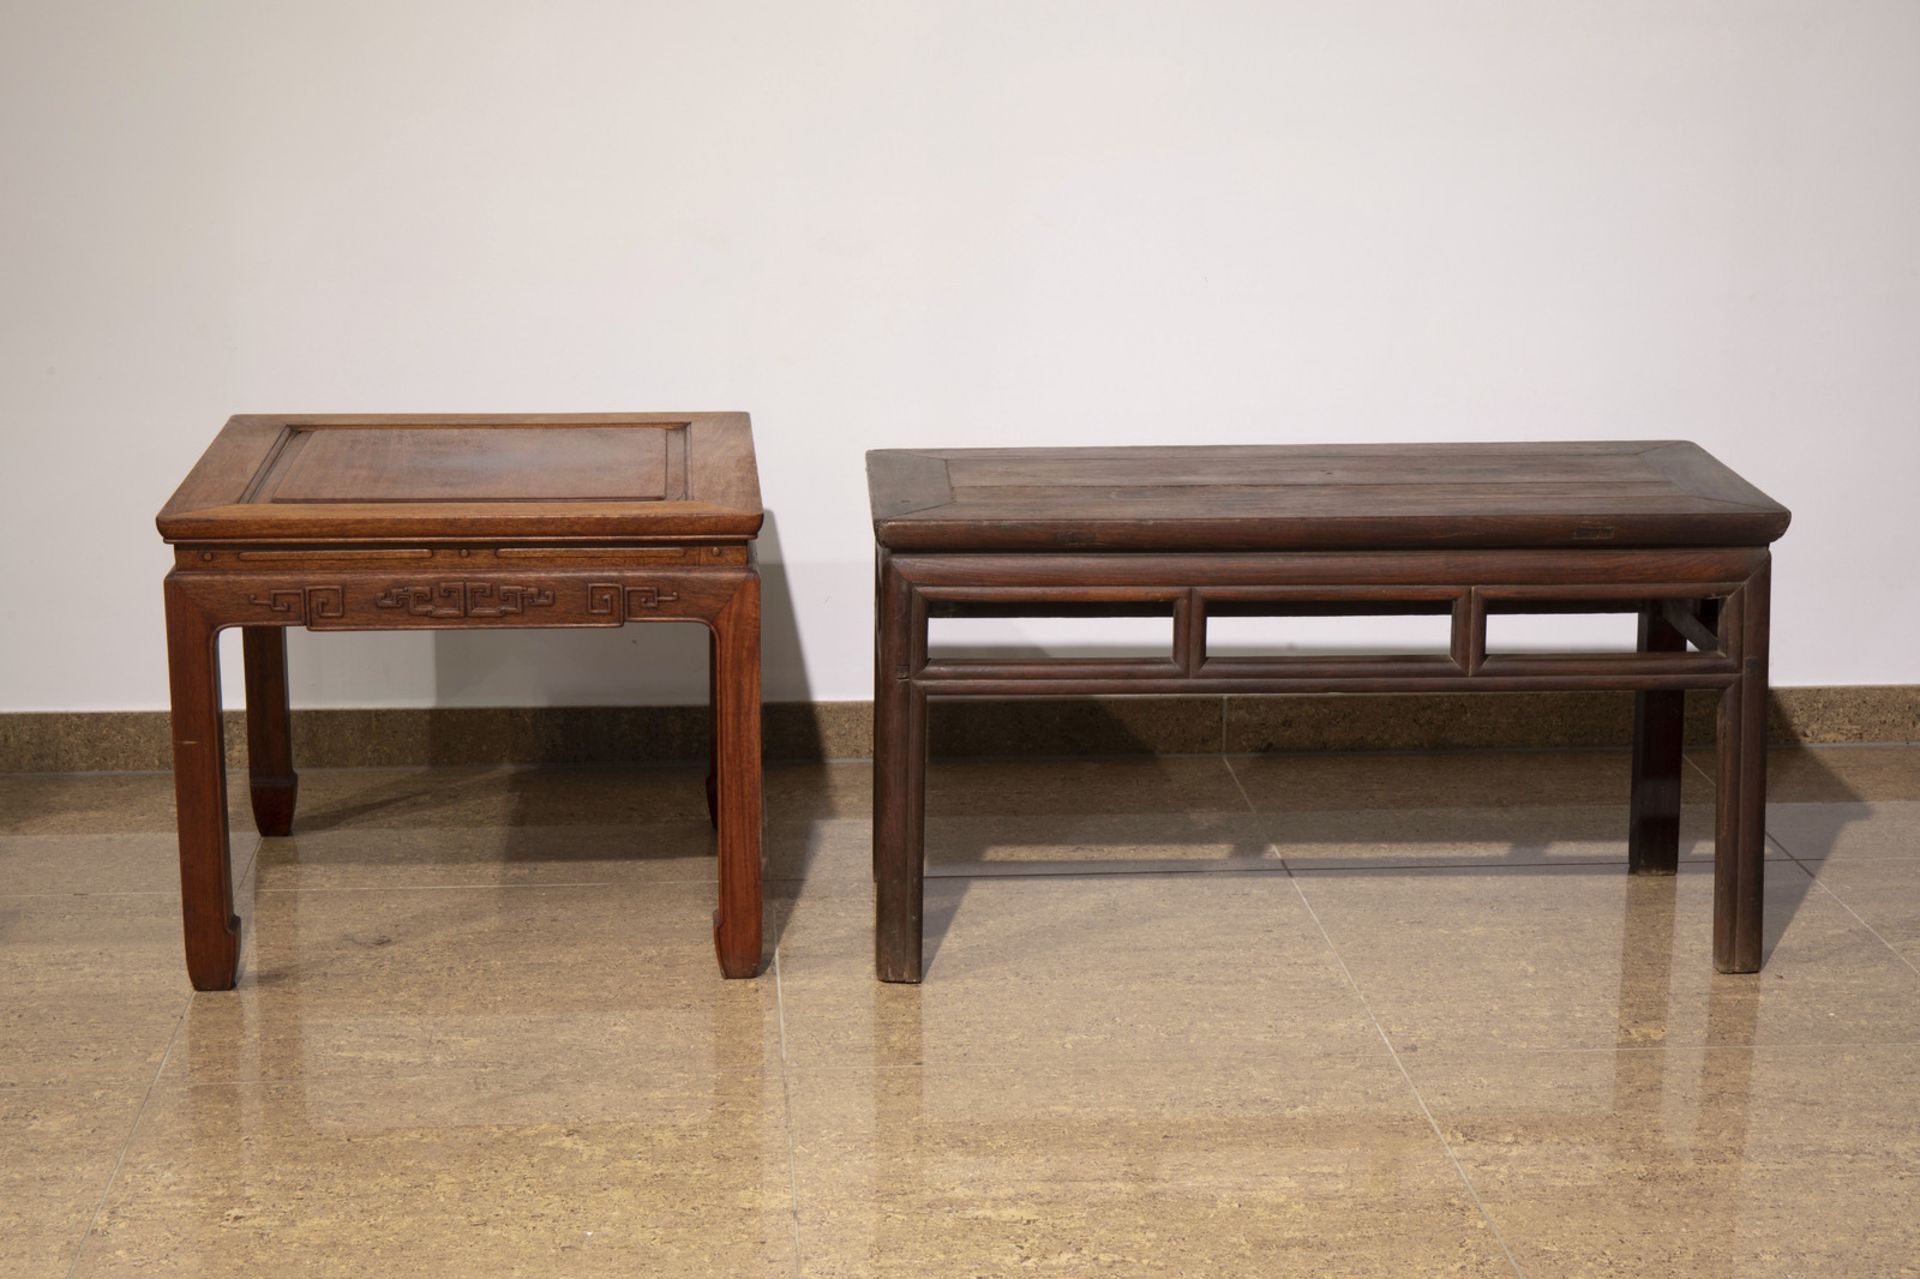 Two Chinese wooden side tables, 19th/20th C. - Image 2 of 7